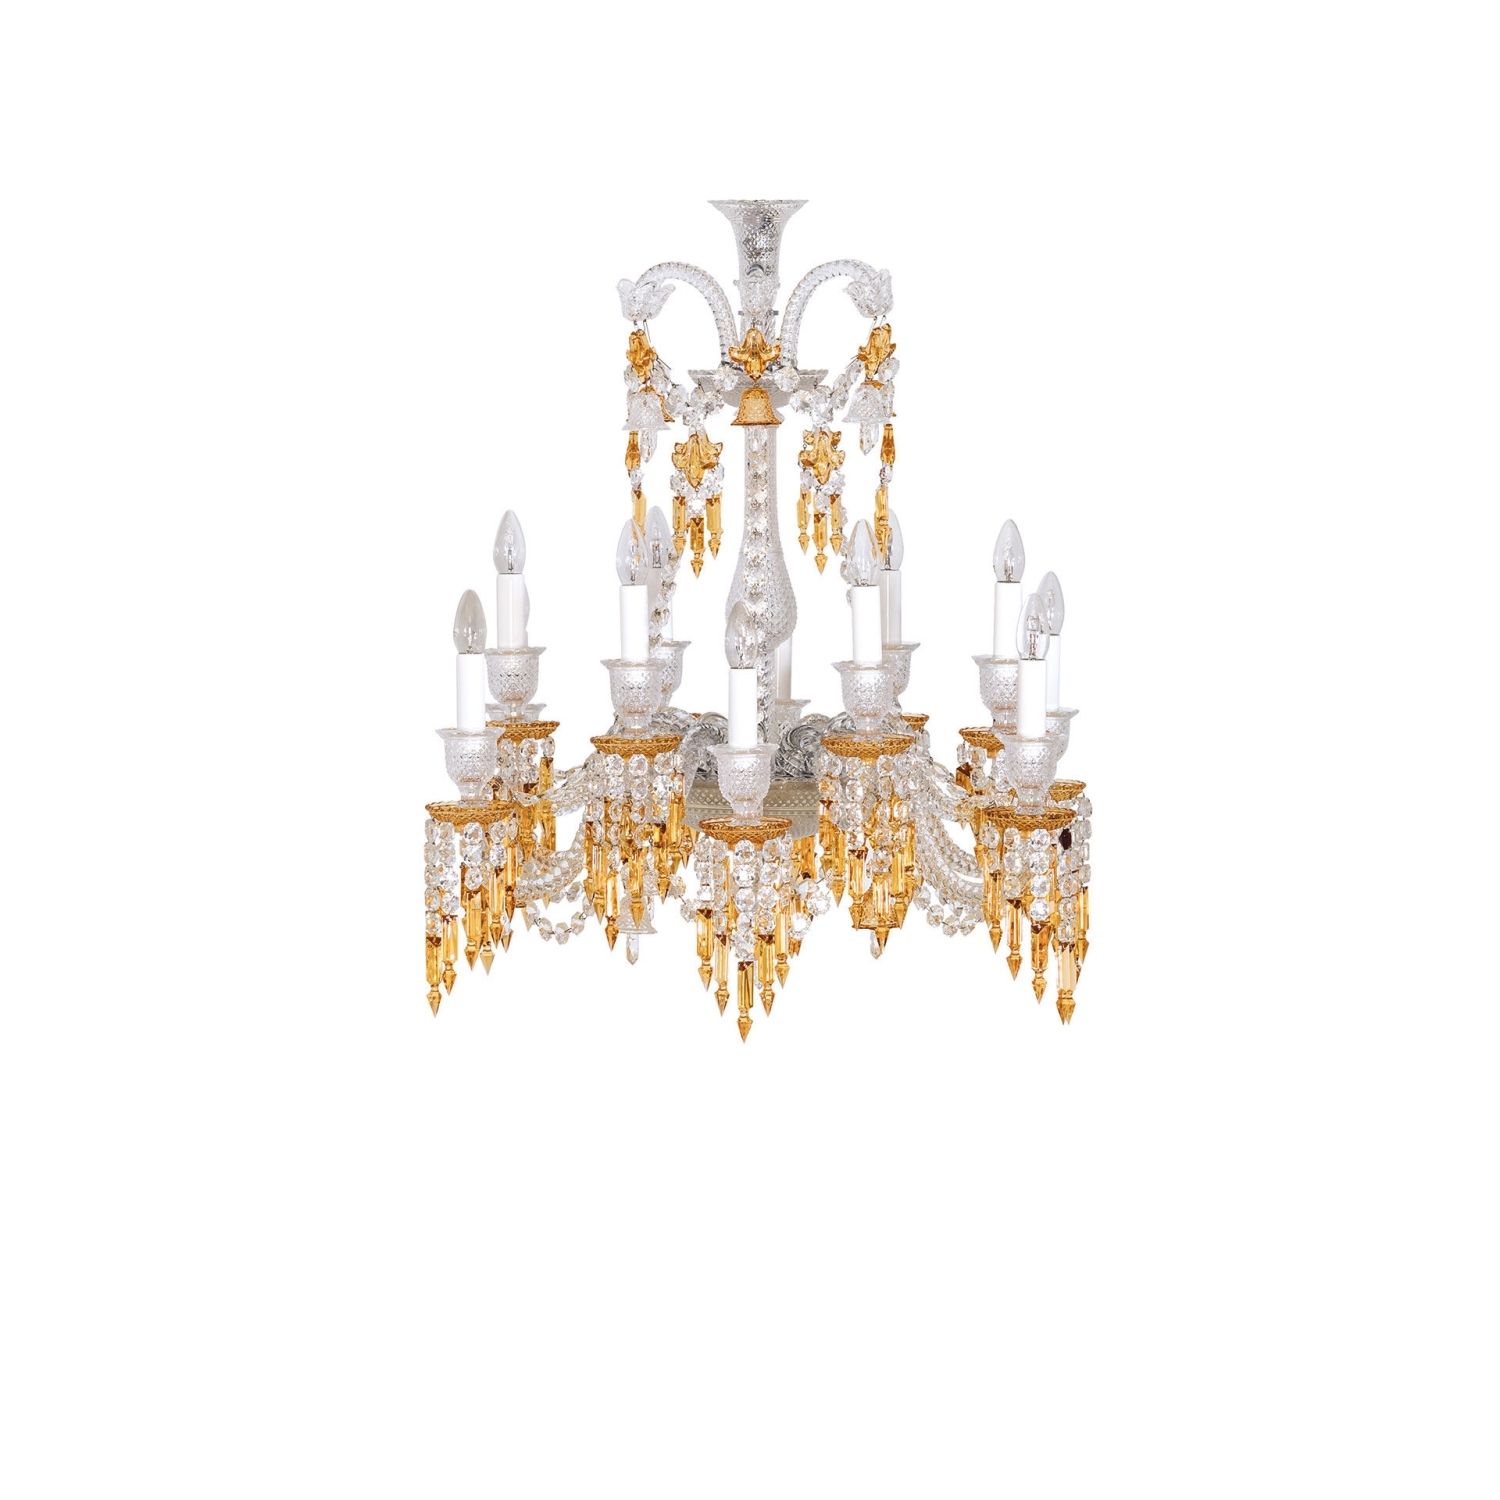 Chandelier 12l Baccarat Zenith Charleston 2809412 With Short Chandeliers (View 8 of 25)